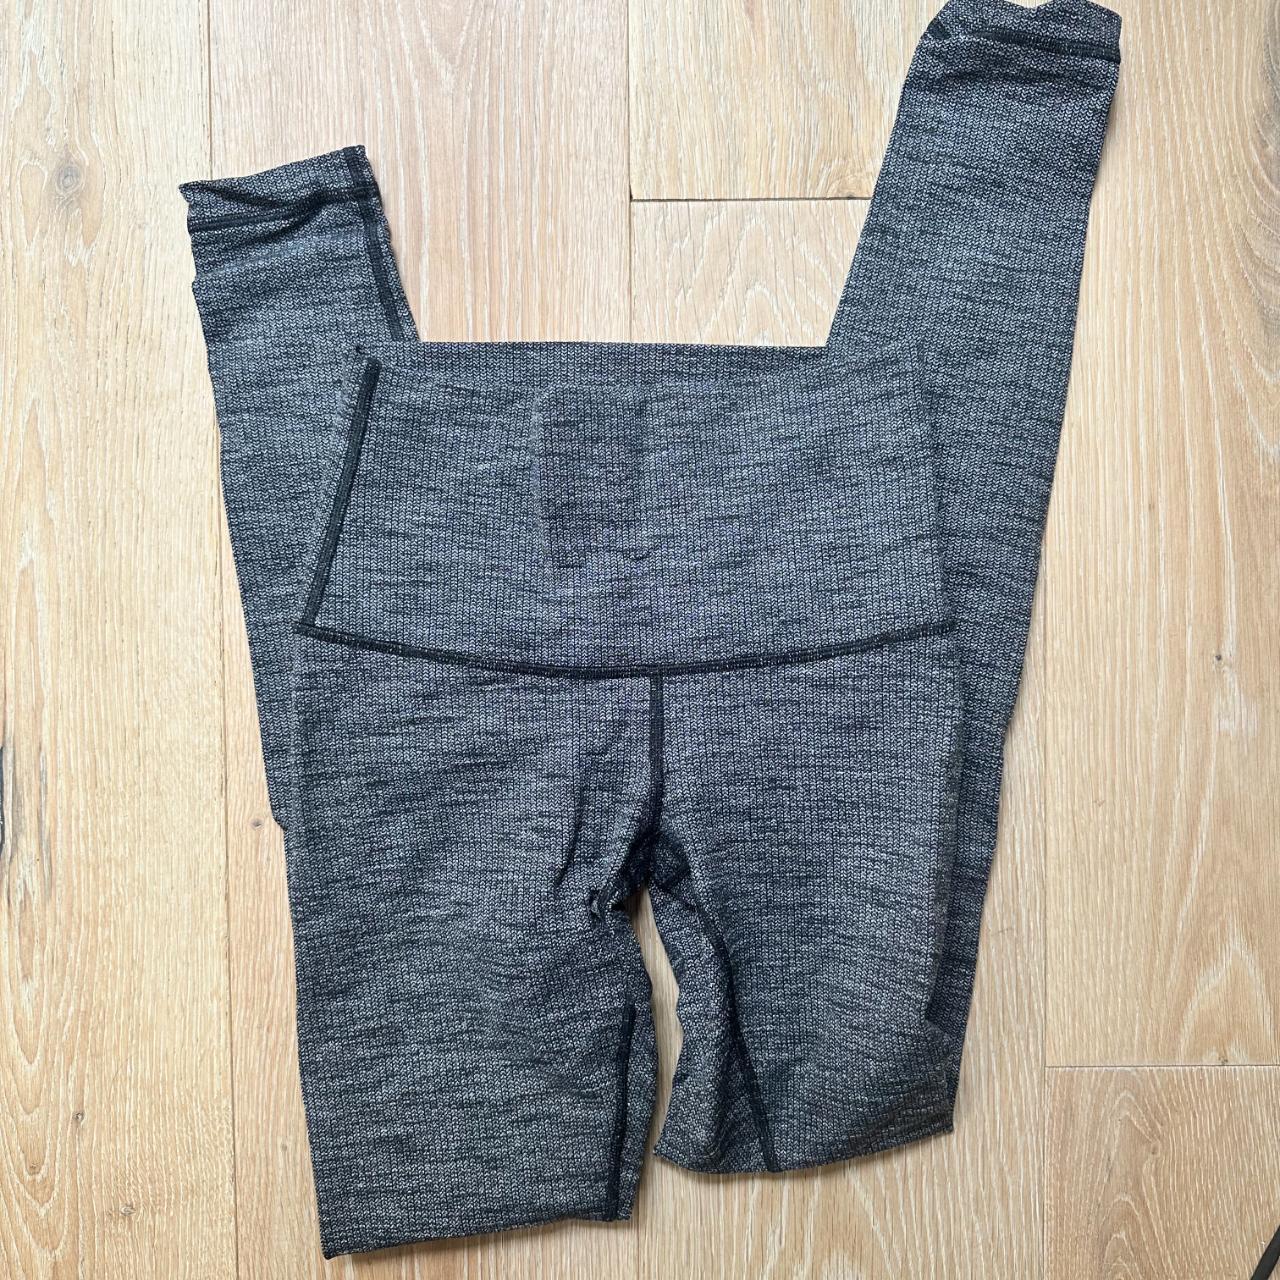 Grey Leggings - Probably Size small - Either Lulu... - Depop